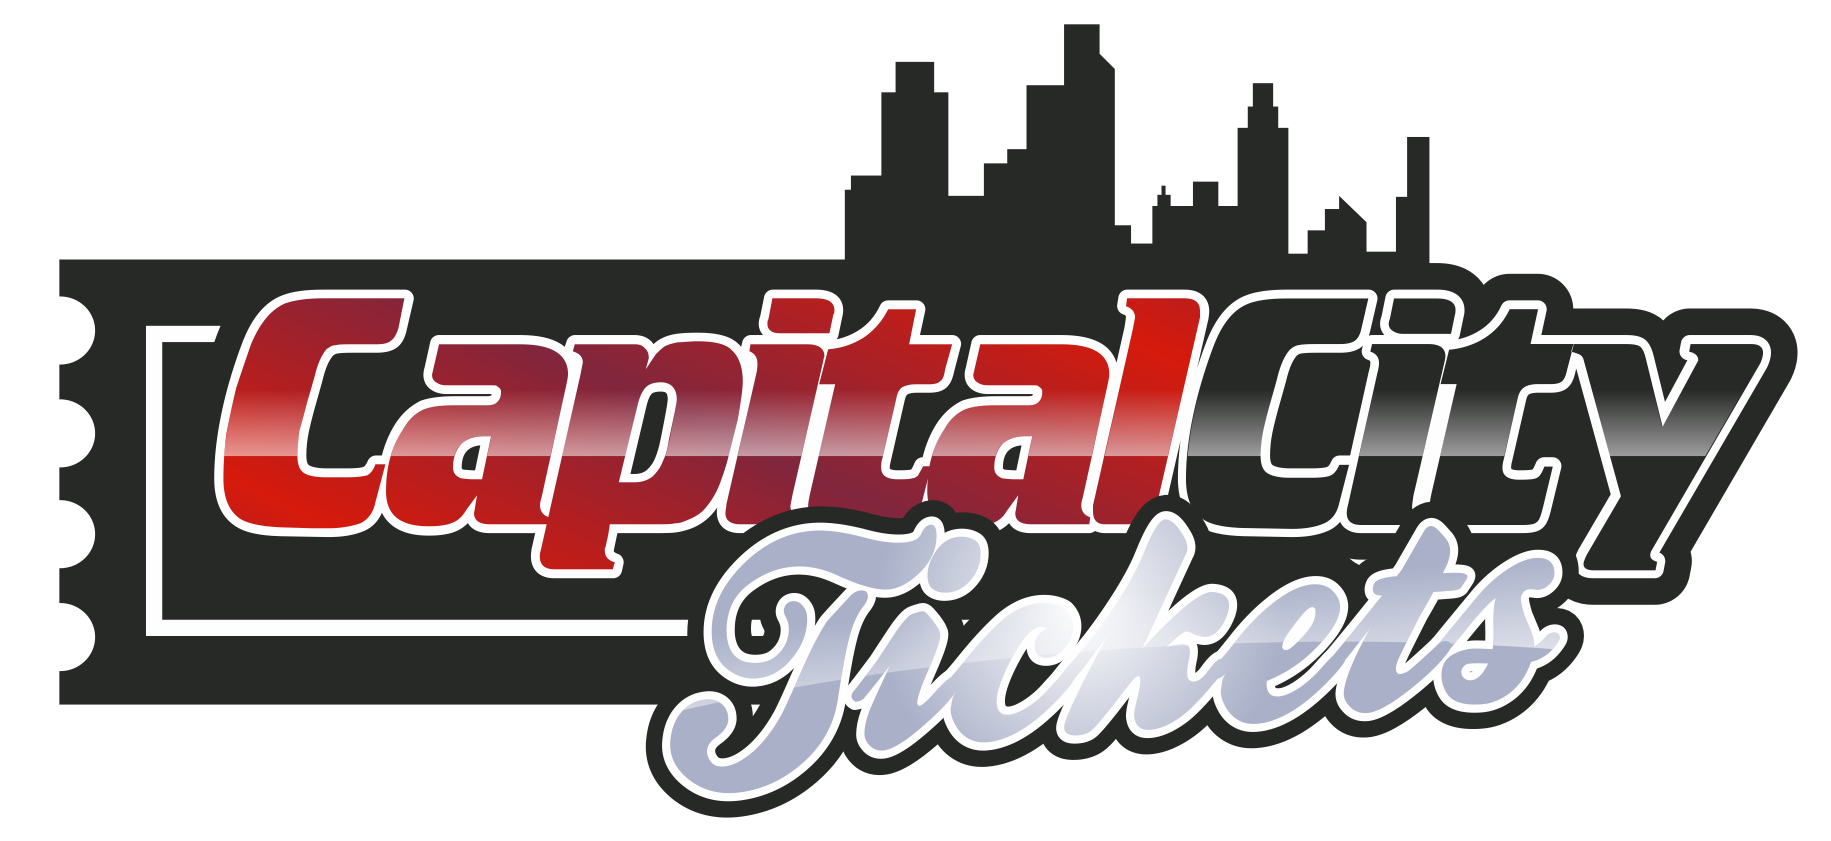 Discount 2021-22 Vegas Golden Knights Hockey Tickets for Center Ice, Upper, and Club Seating Online with Promo Code at Capital City Tickets - See Schedules, Seating Charts, and Game Dates